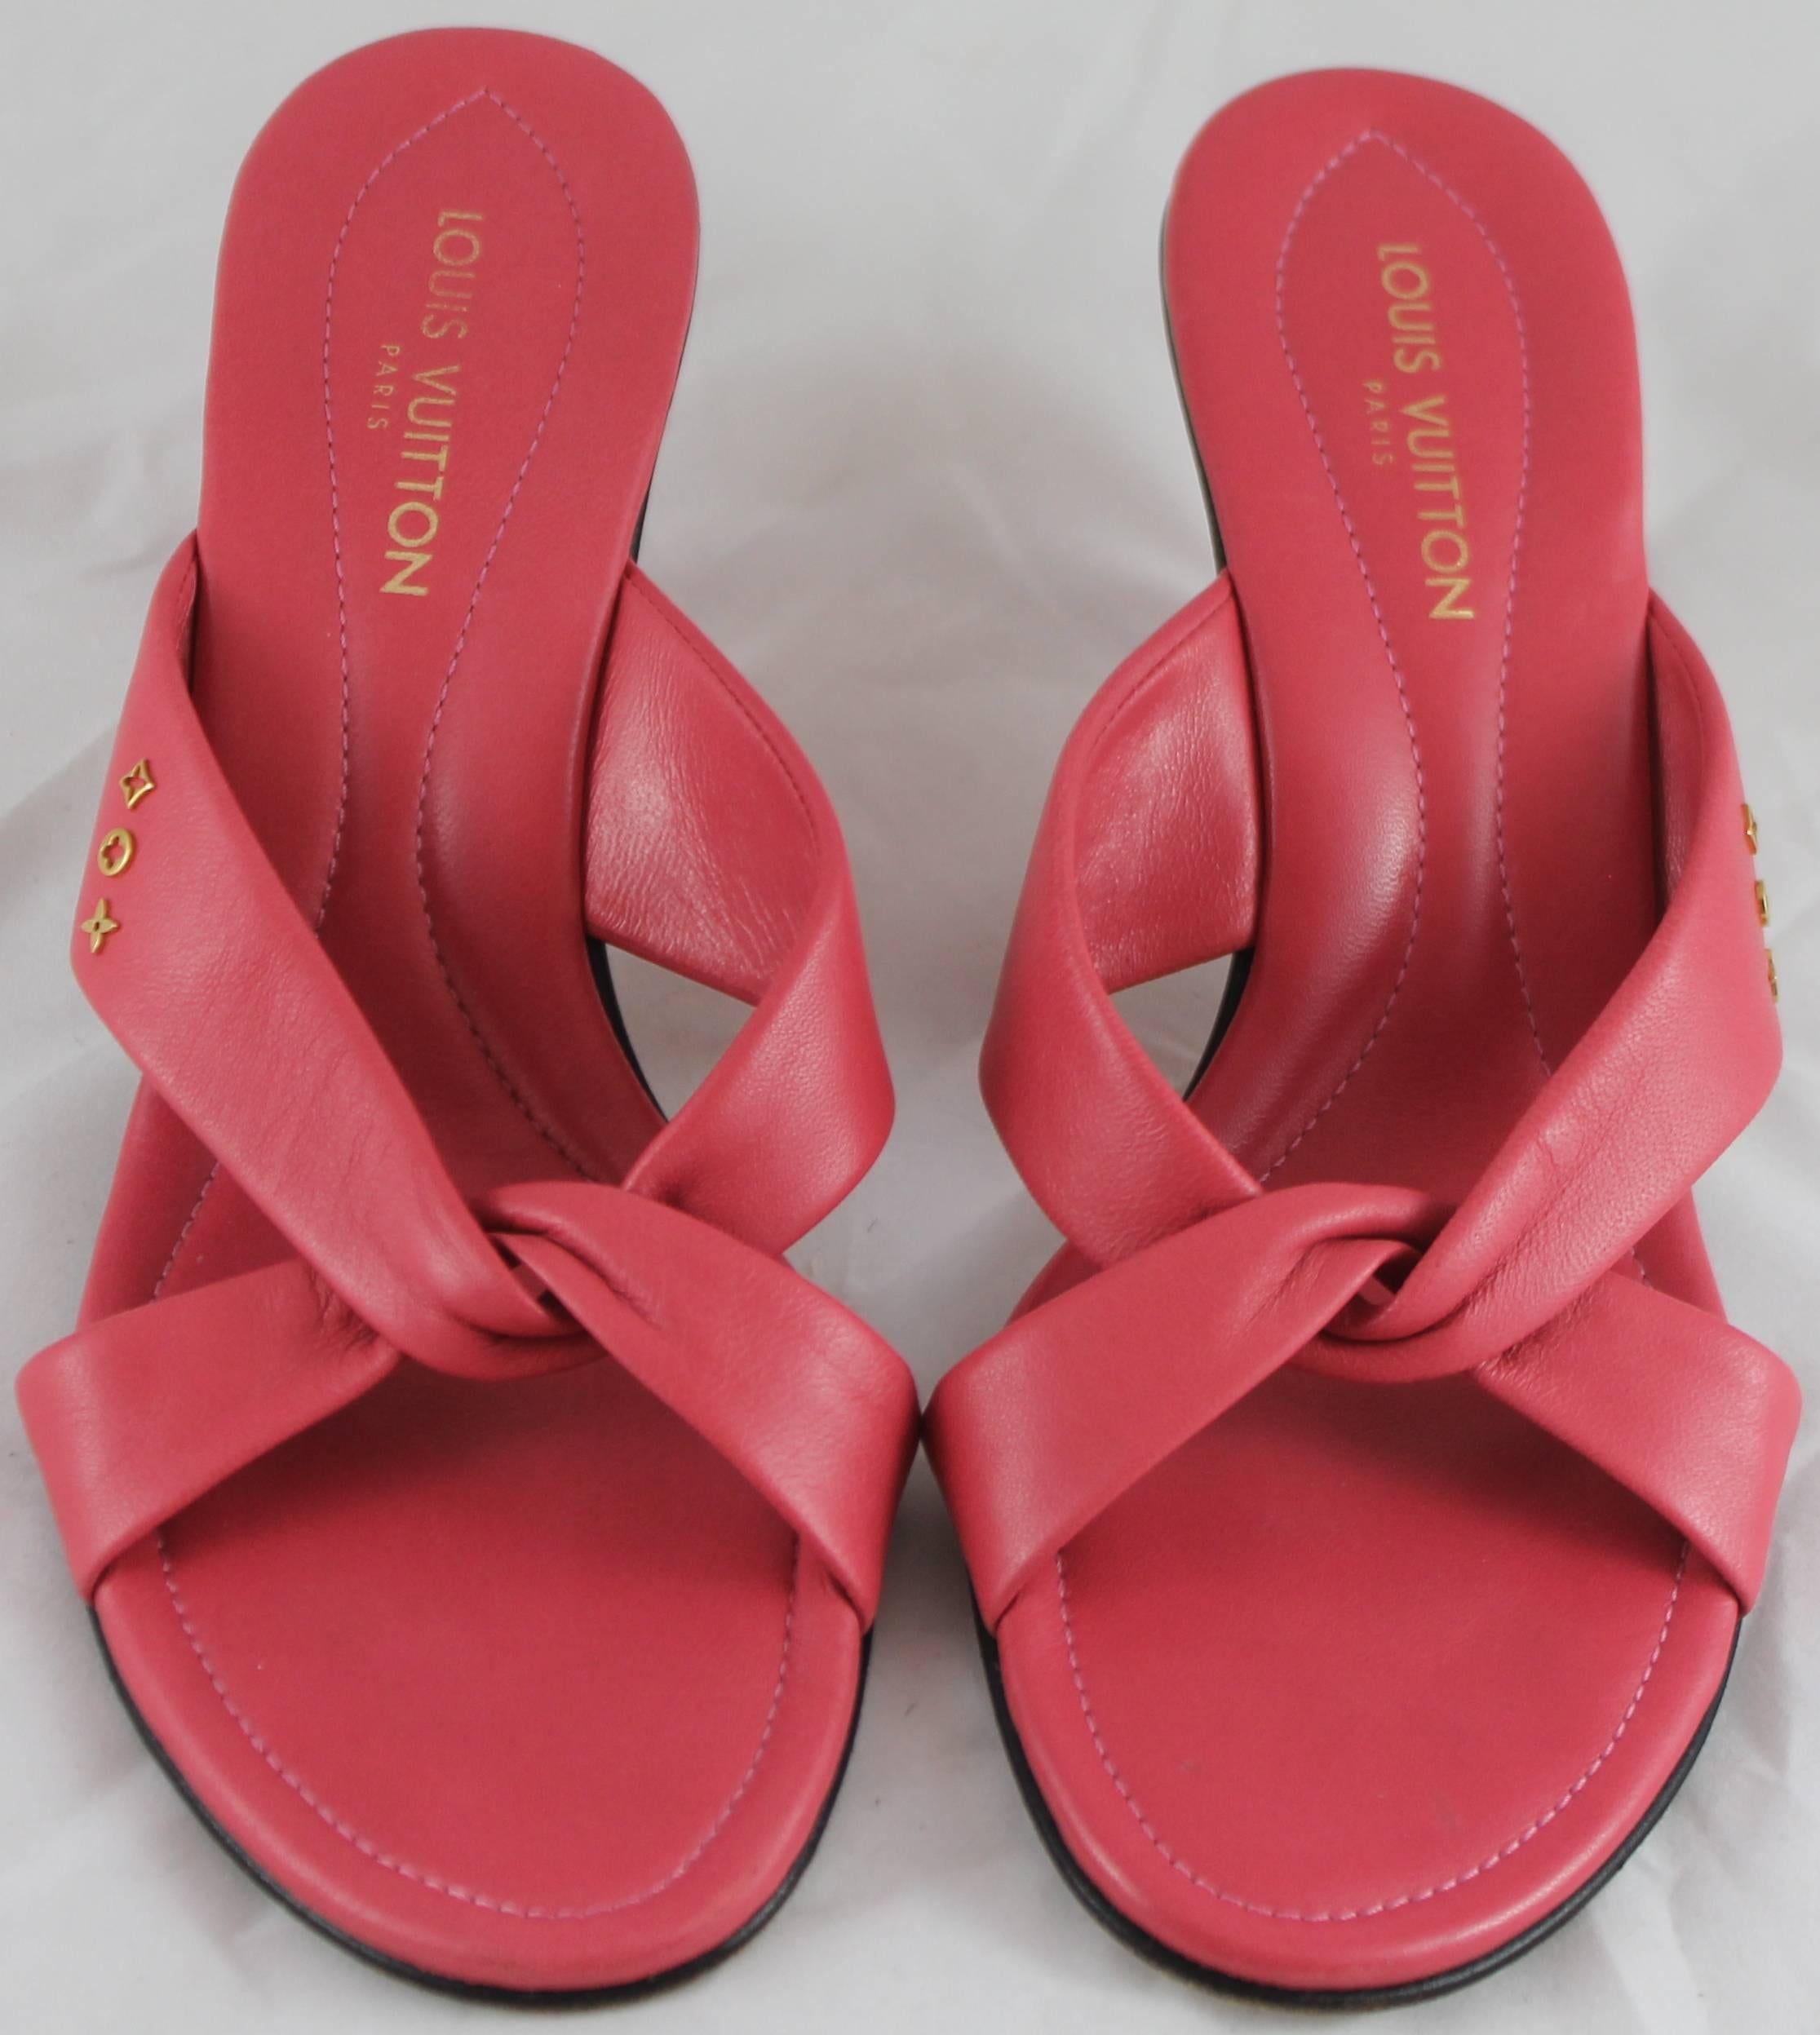 Red Louis Vuitton Coral Criss-Cross Leather Sandals with Heel and Gold Details - 37